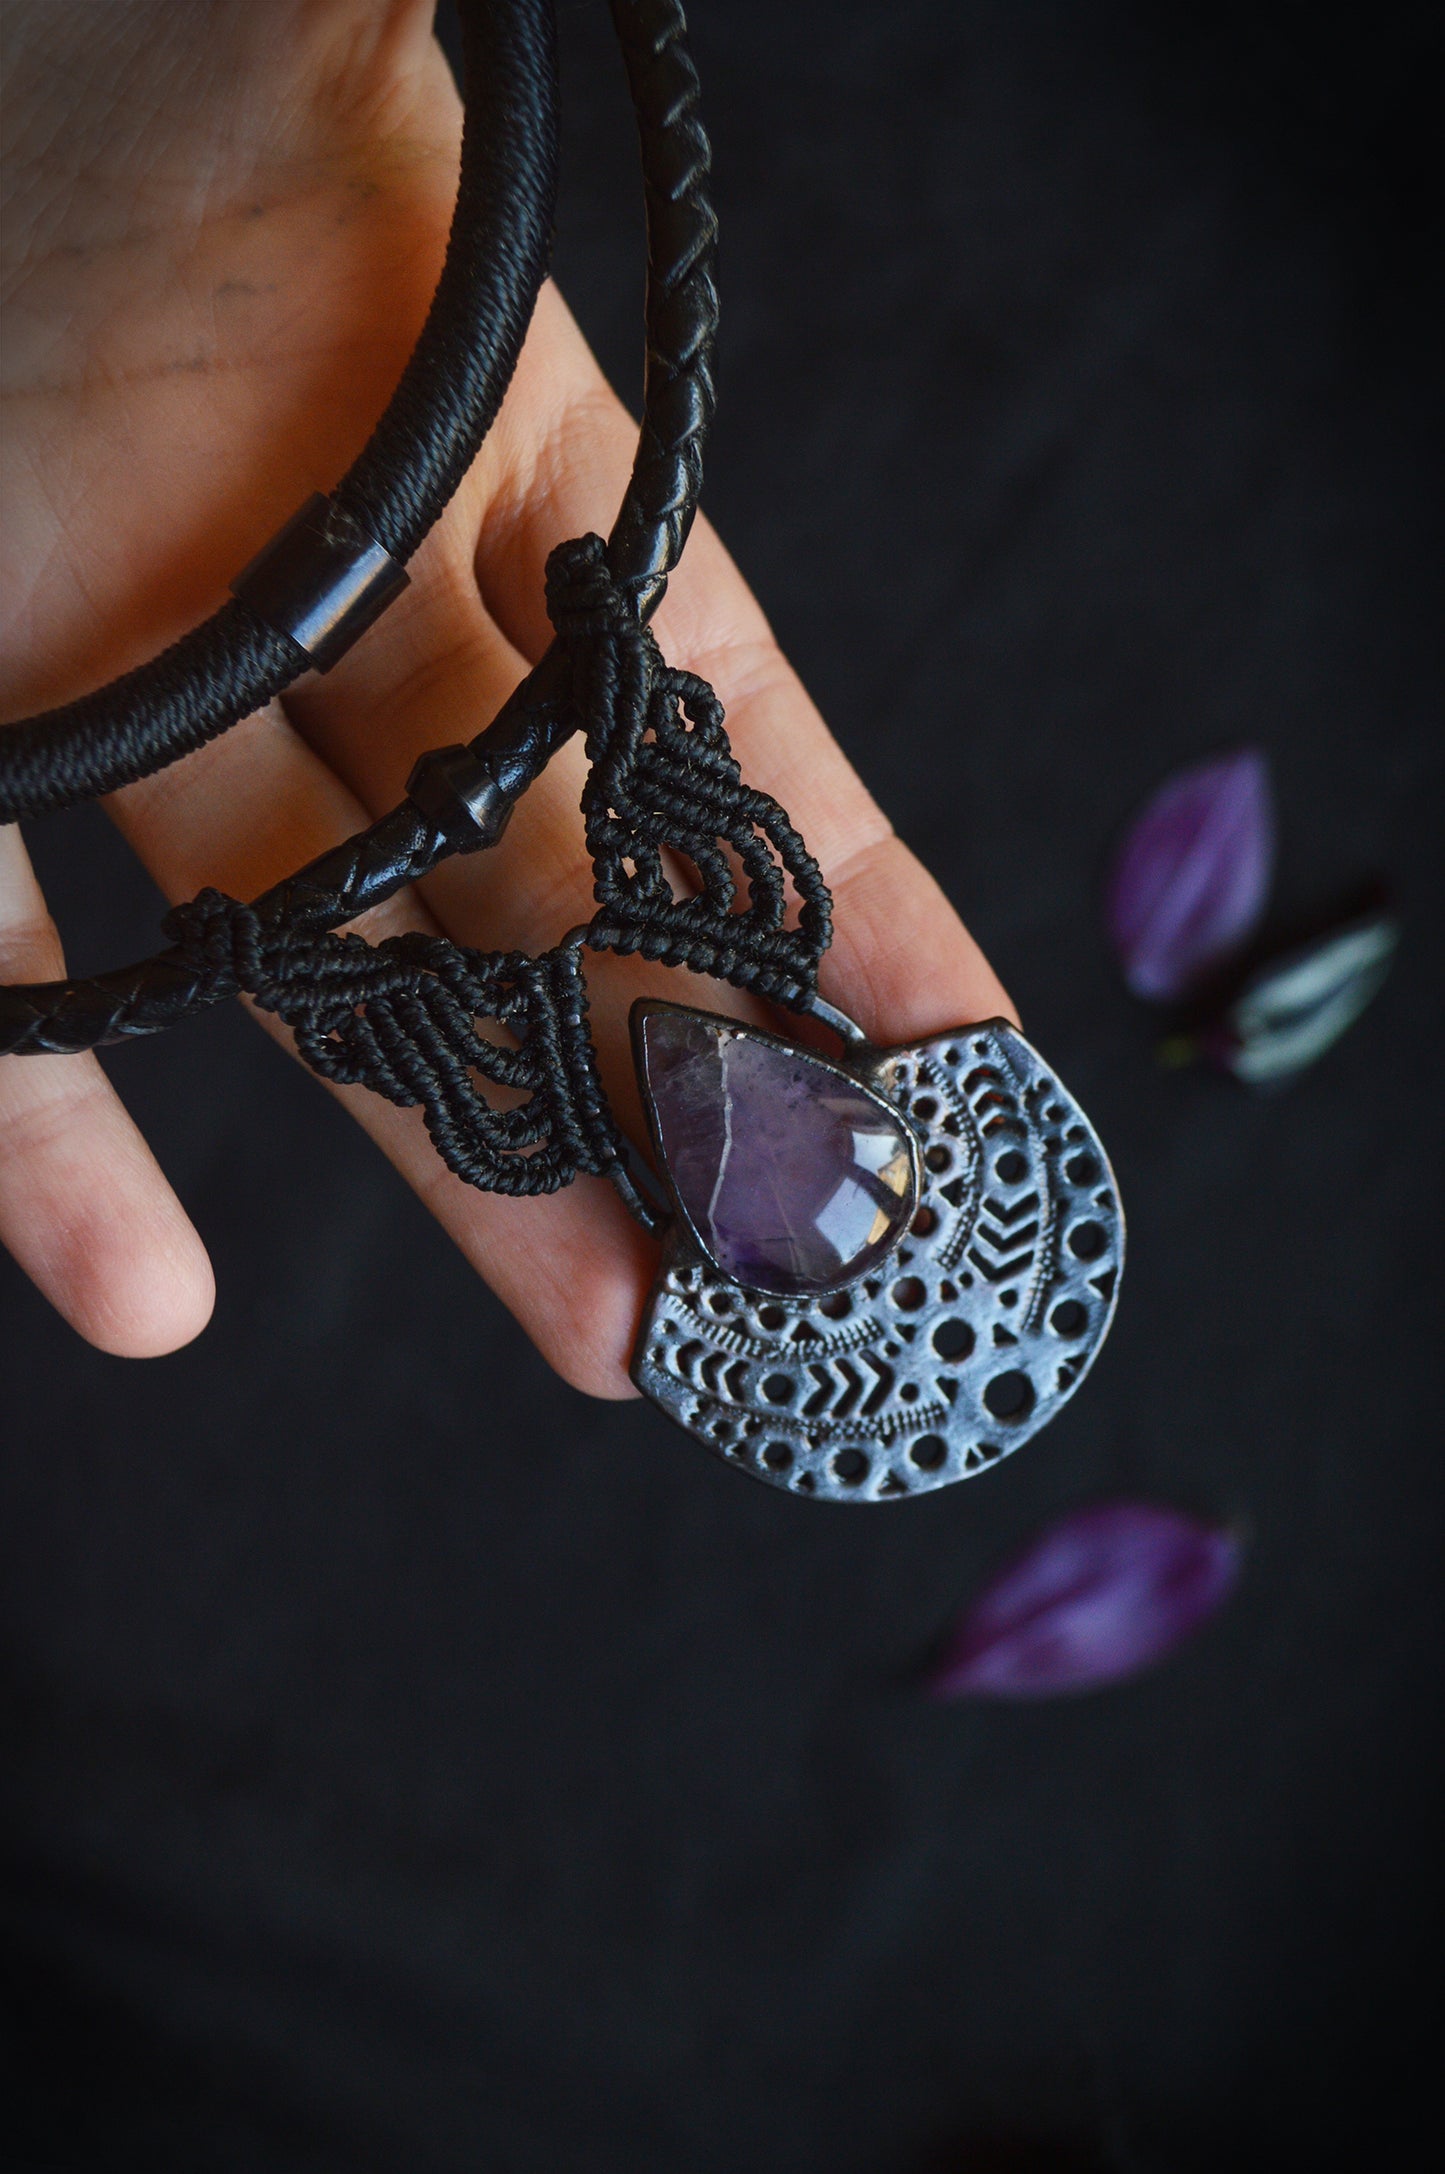 Total black amethyst electroformed pendant on macrame and leather torque necklace